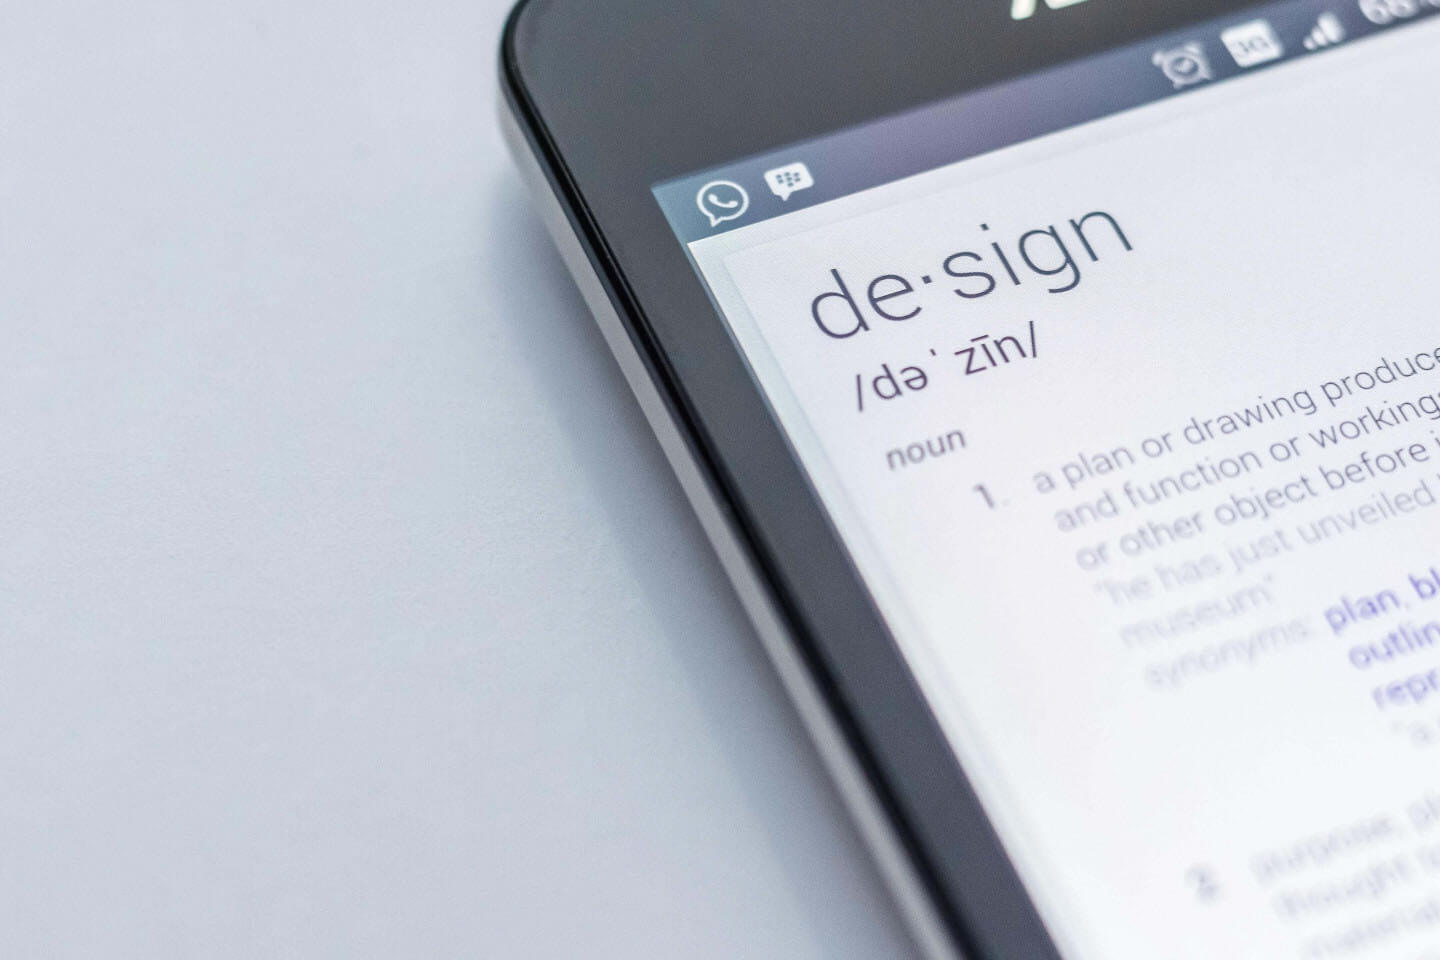 Read more about how to be consistent in app design with the help of a Design System. 